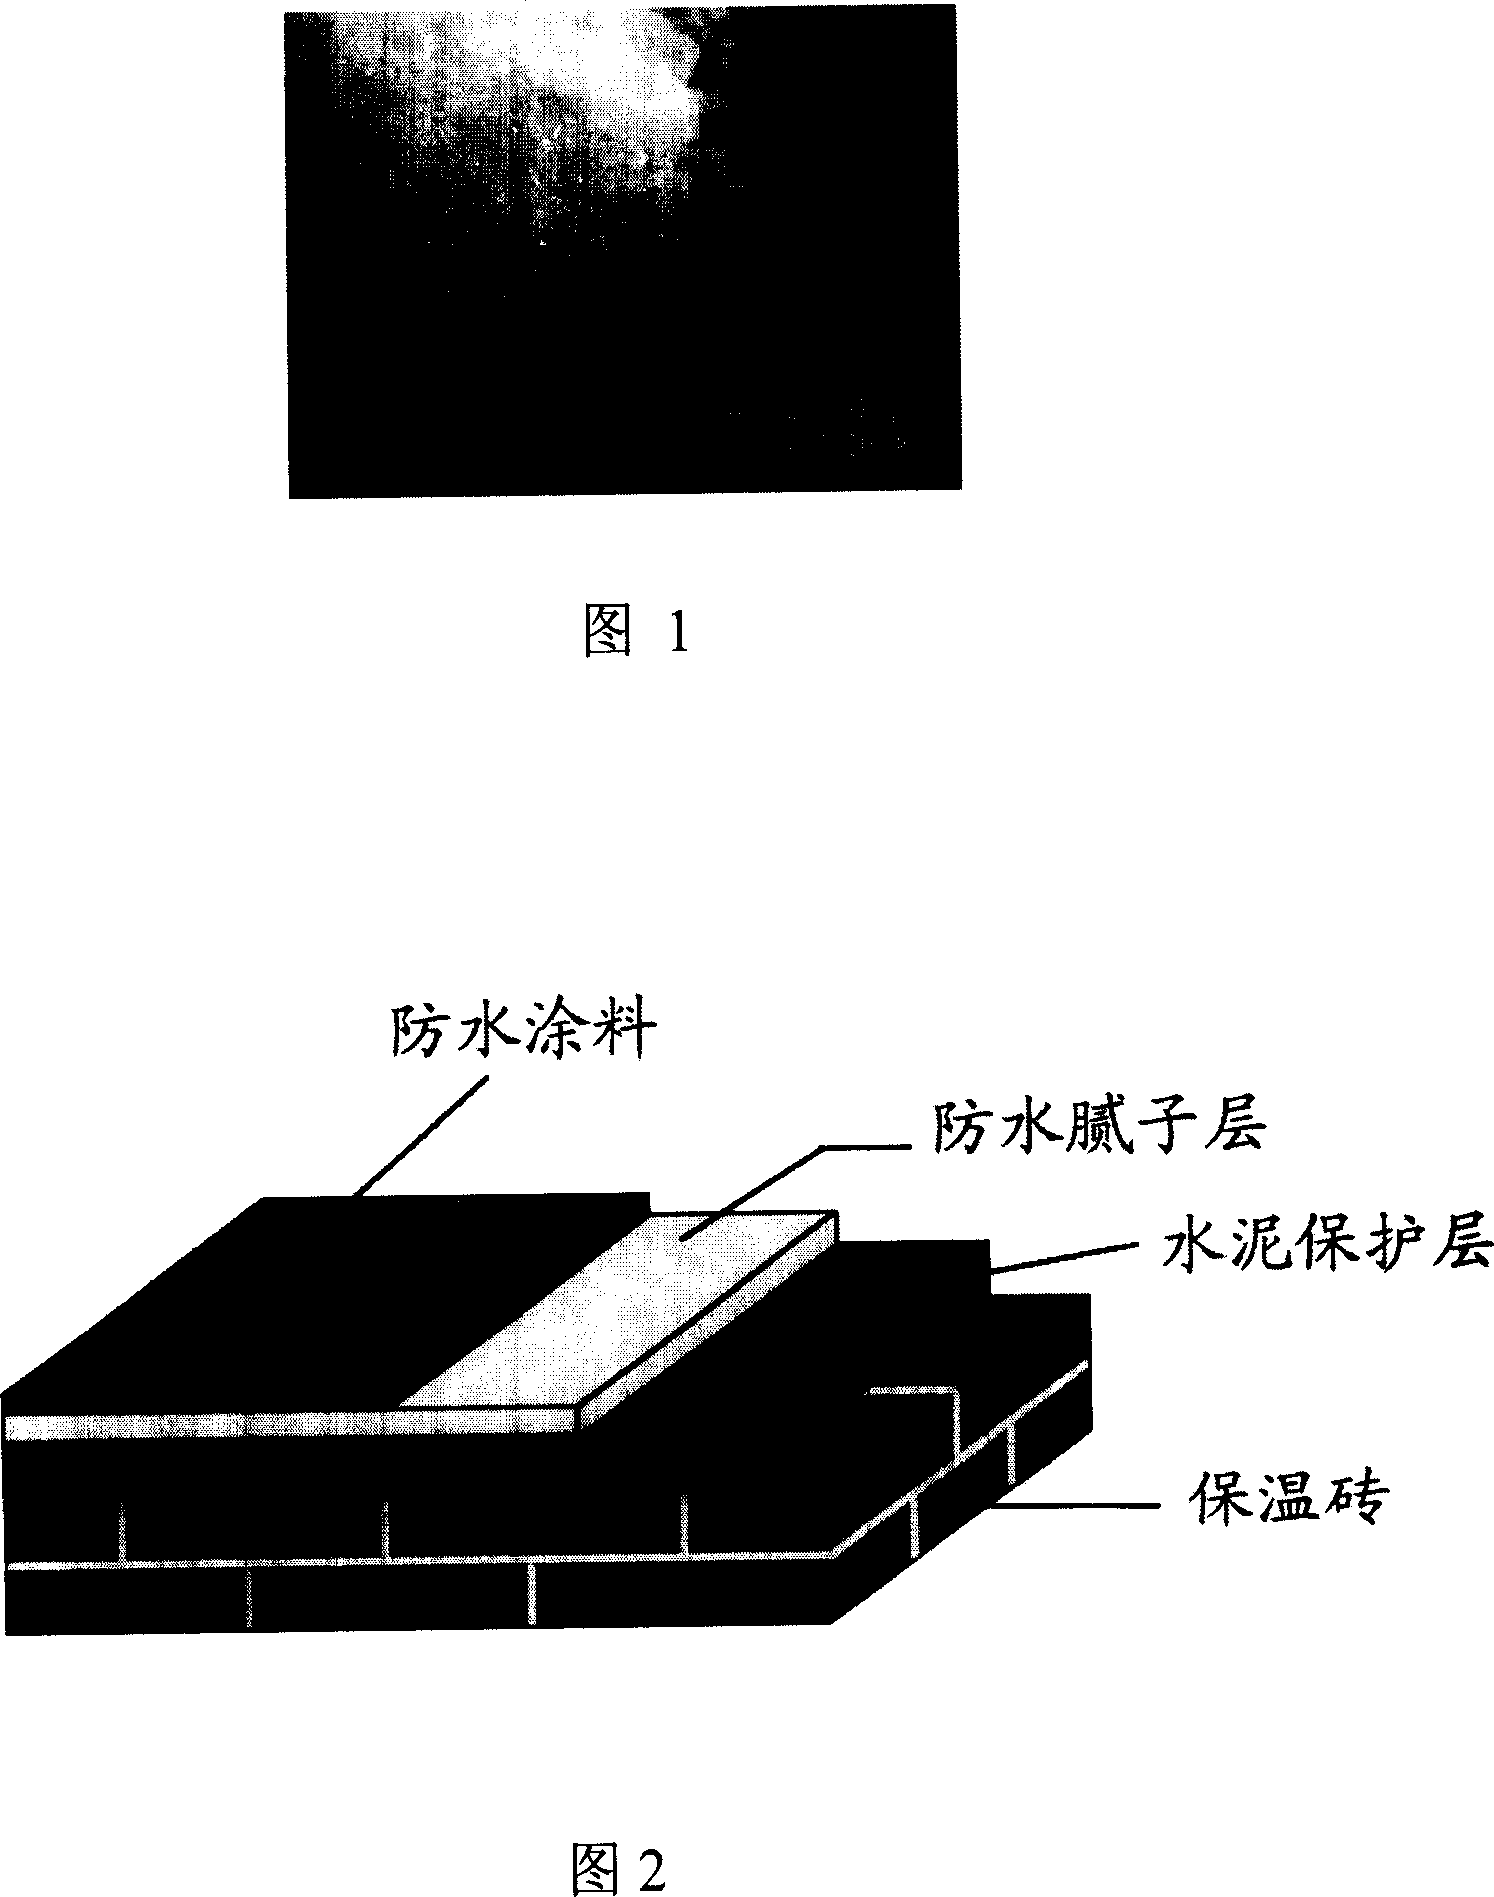 Heat insulating brick and its production process